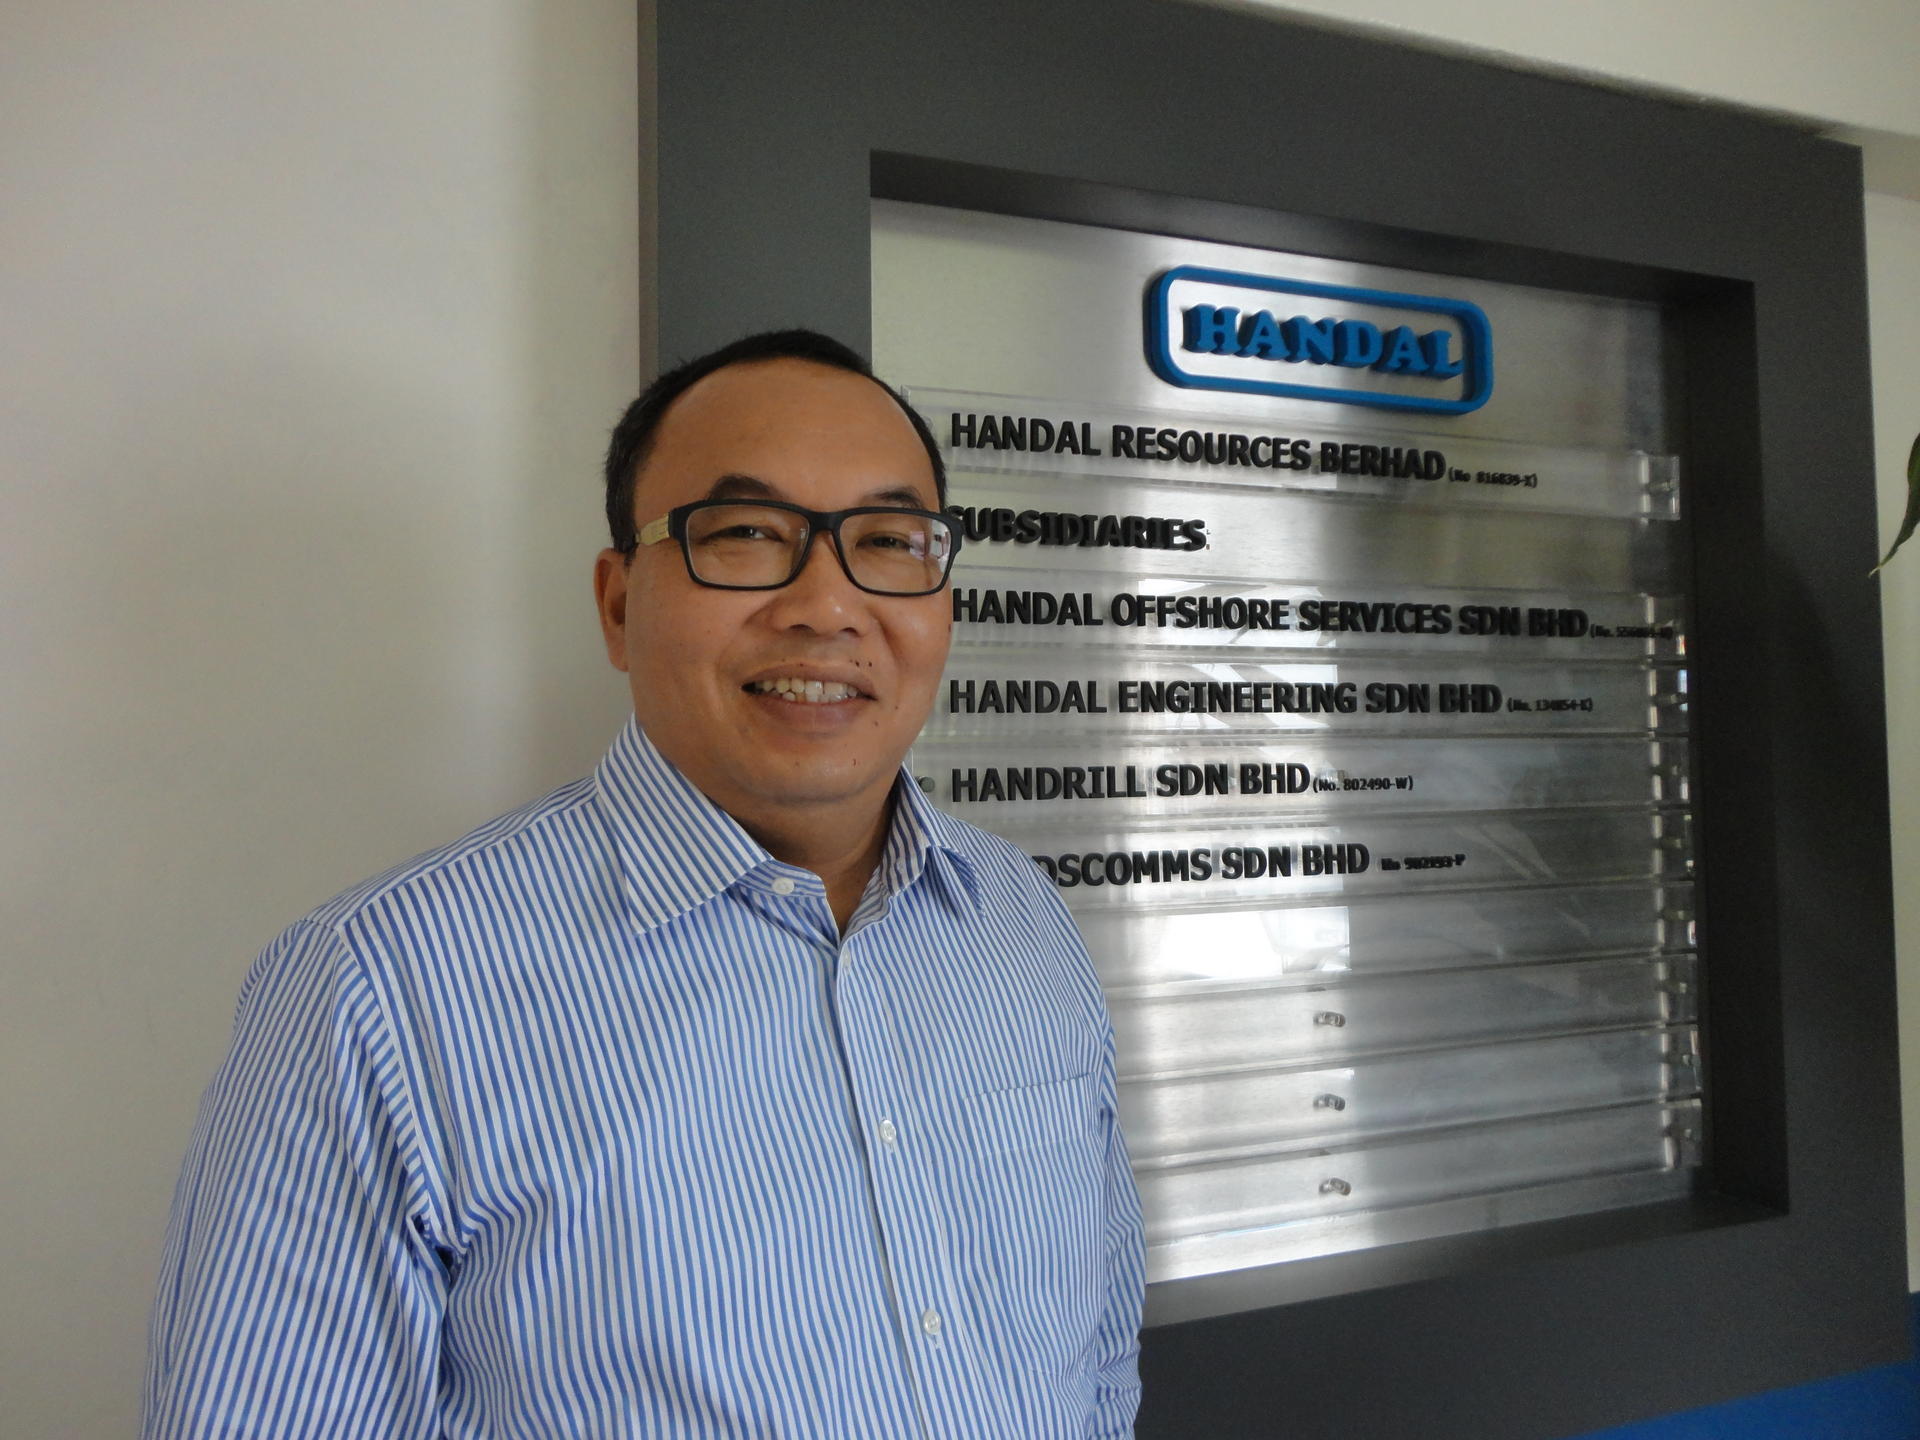 Mallek Rizal Mohsin, group managing director and CEO